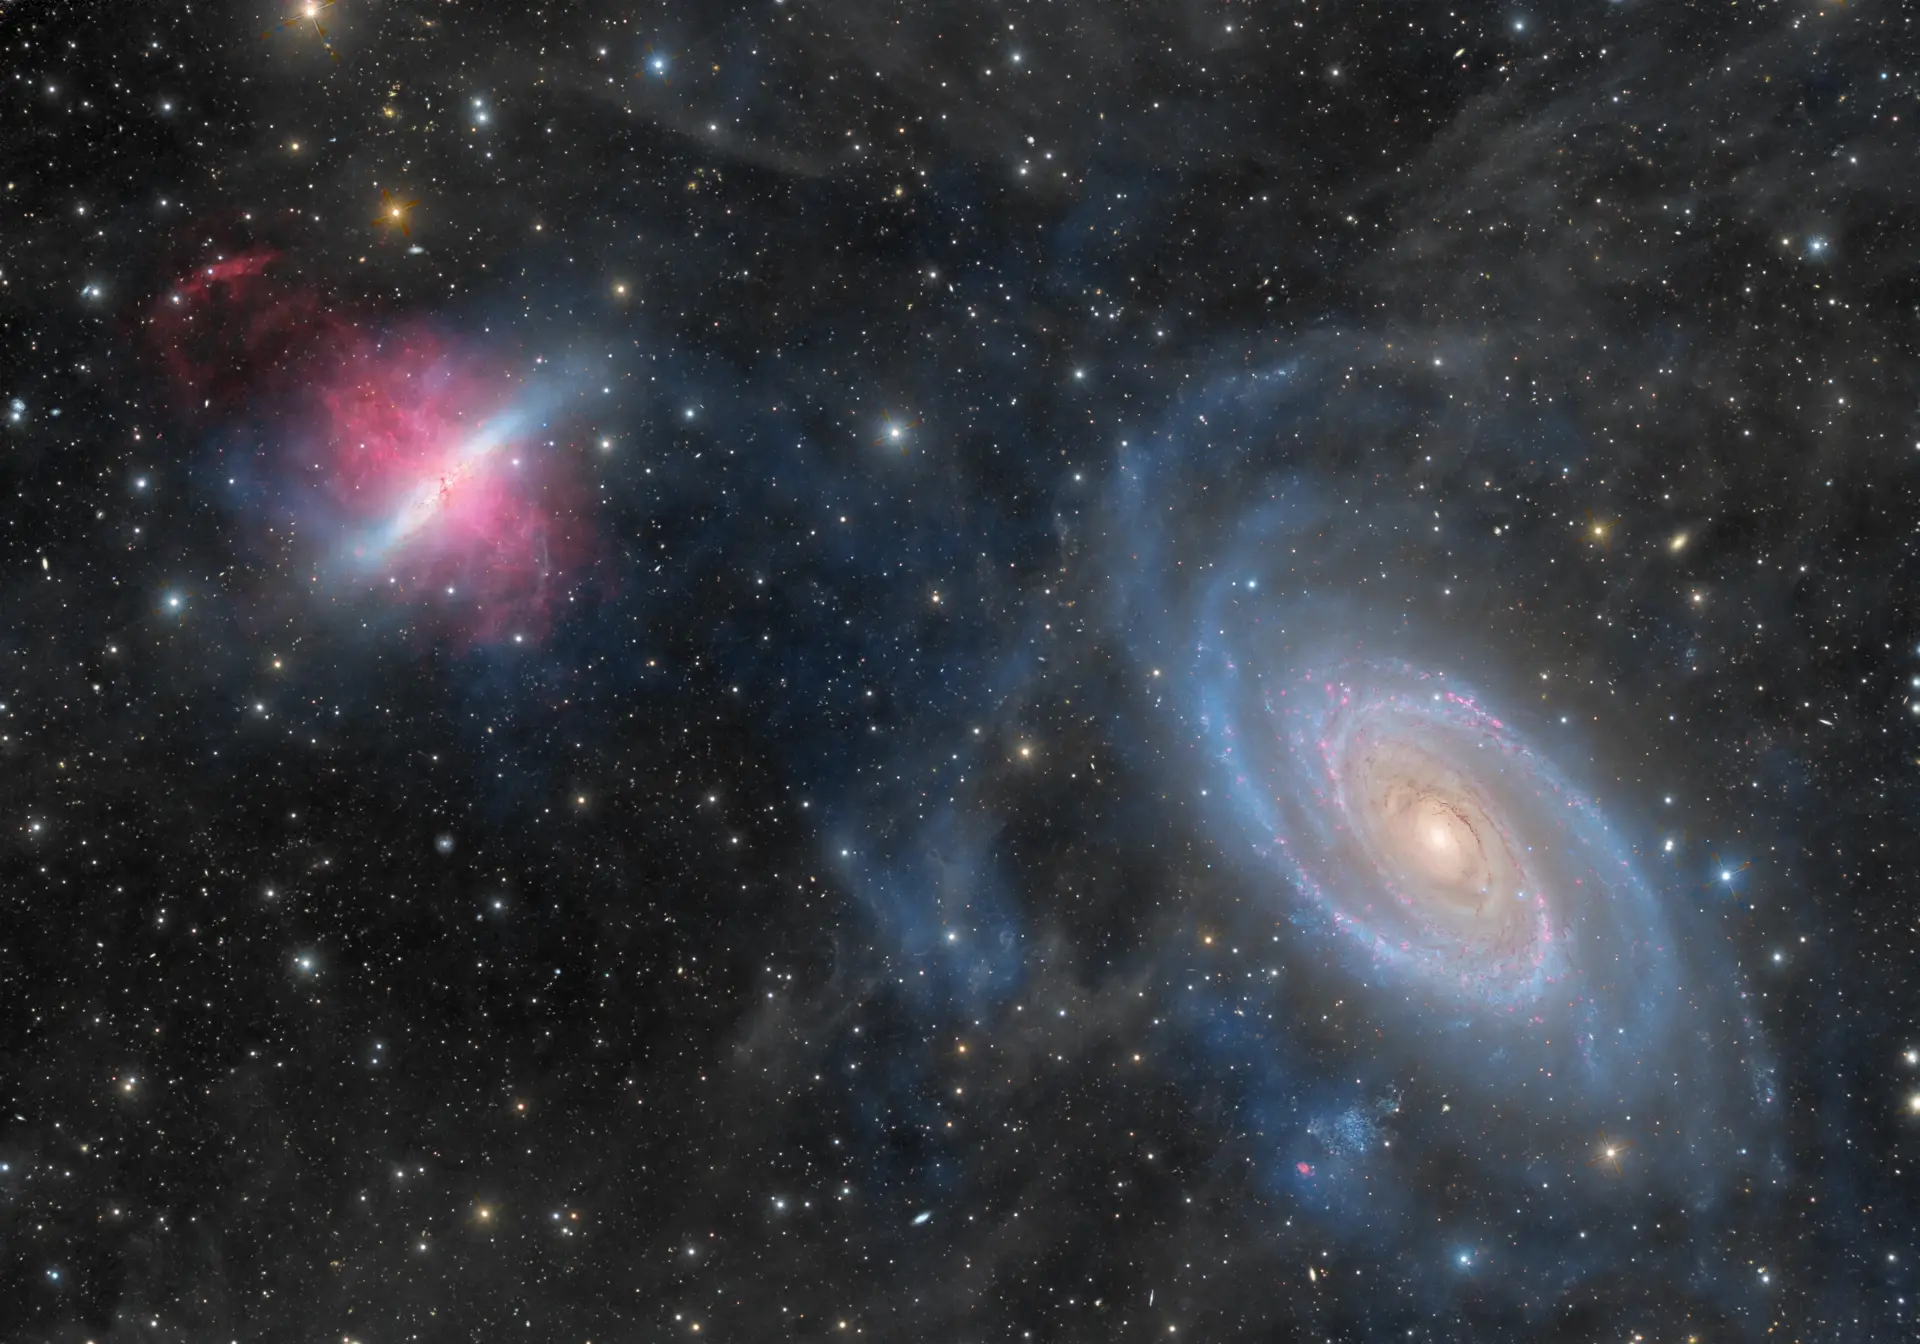 Ultra Deep look at Messier 81 and 82